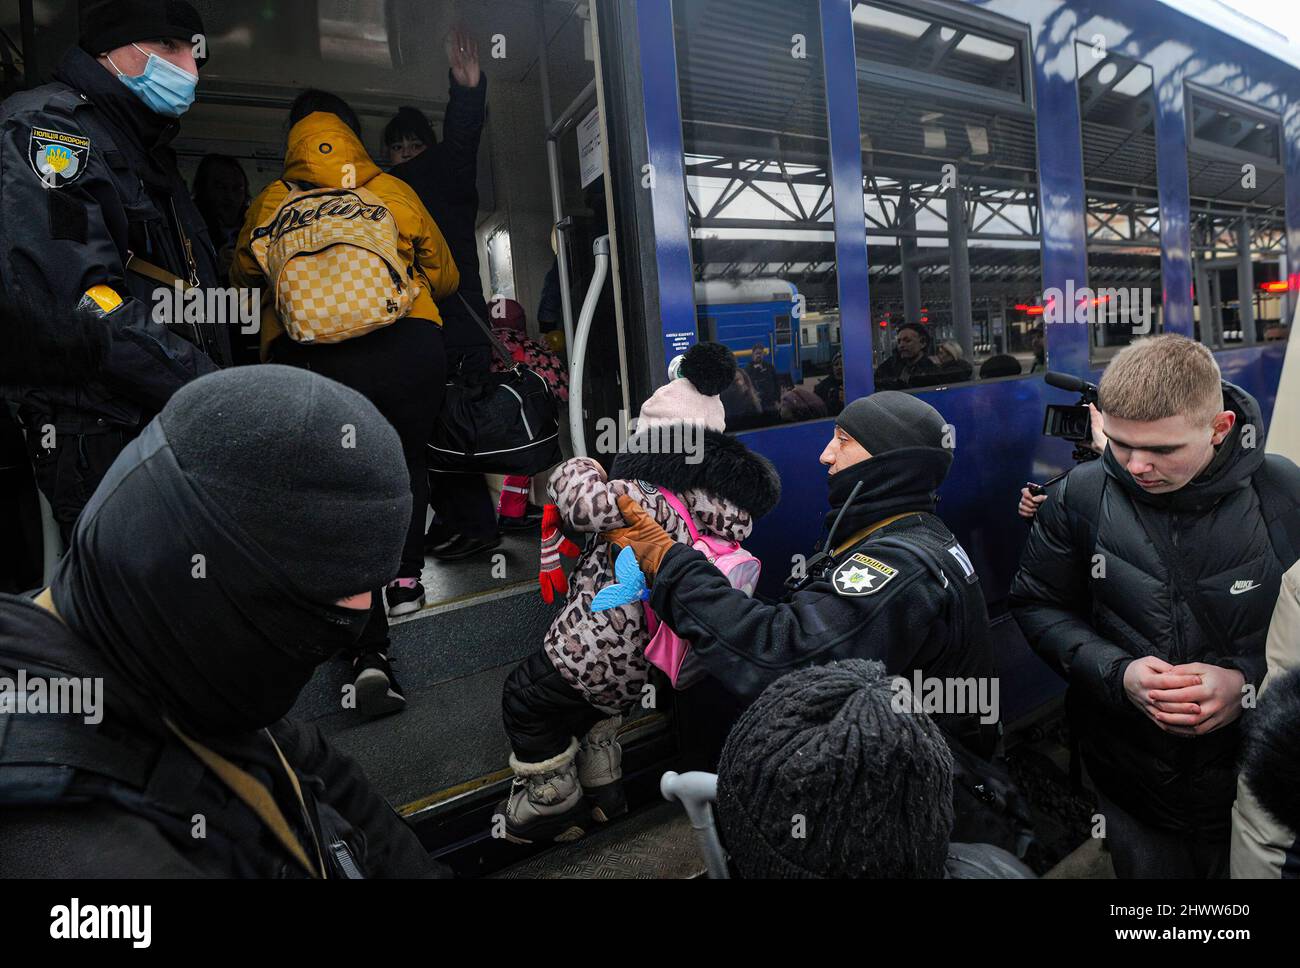 Kyiv, Ukraine. 28th Feb, 2022. Ukrainian police help children to board an evacuation train in Kyiv. Since the beginning of the Russian military invasion, more than 1.7 million refugees have left Ukraine. This is reported by the UN refugee agency. (Photo by Sergei Chuzavkov/SOPA Images/Sipa USA) Credit: Sipa USA/Alamy Live News Stock Photo